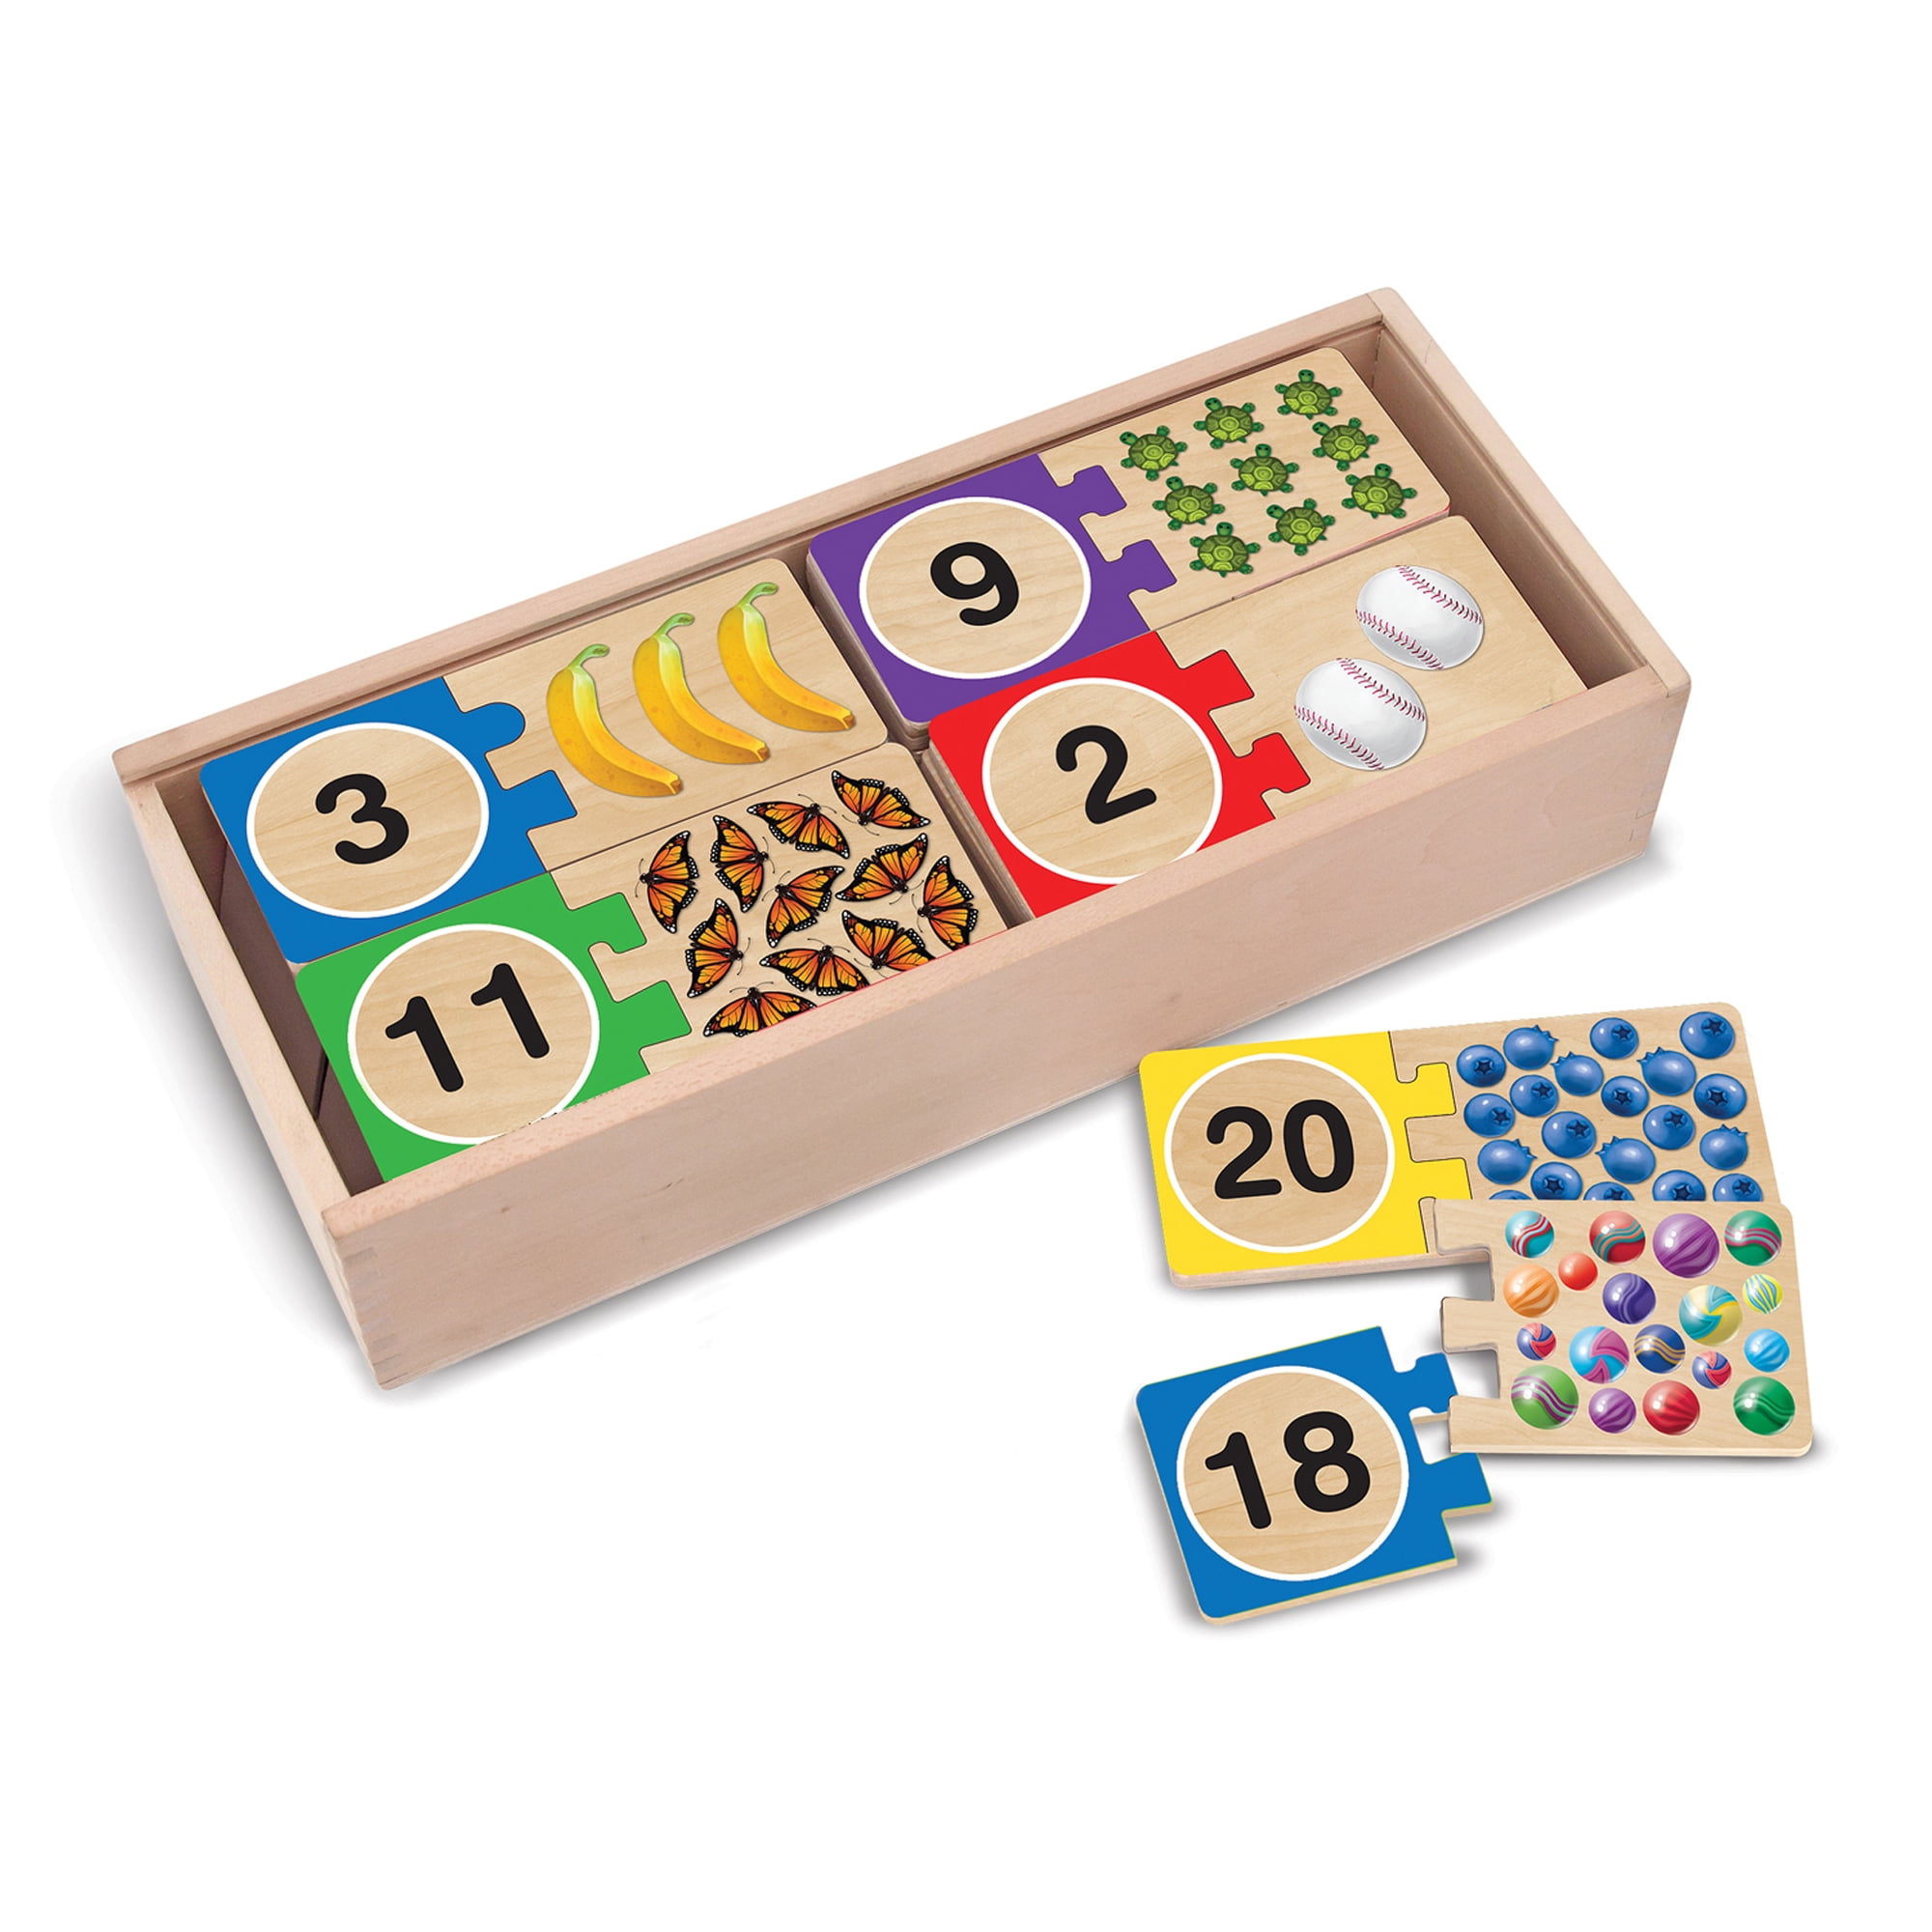 Wooden Lacing Learn to Sew & Count Game/Wooden Storage Box and Laces Included 